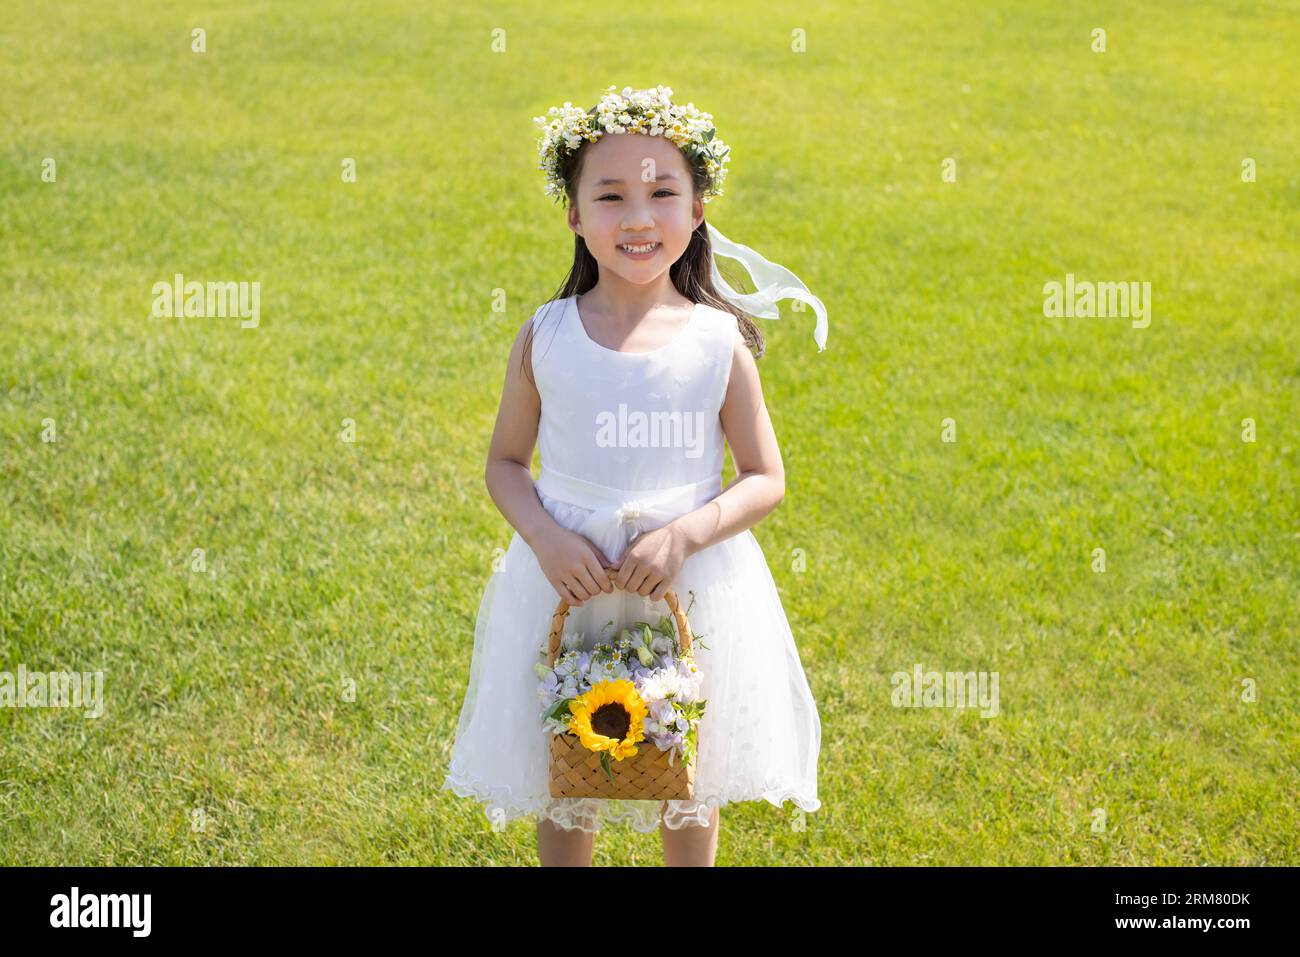 Cute flower girl standing on the grass Stock Photo